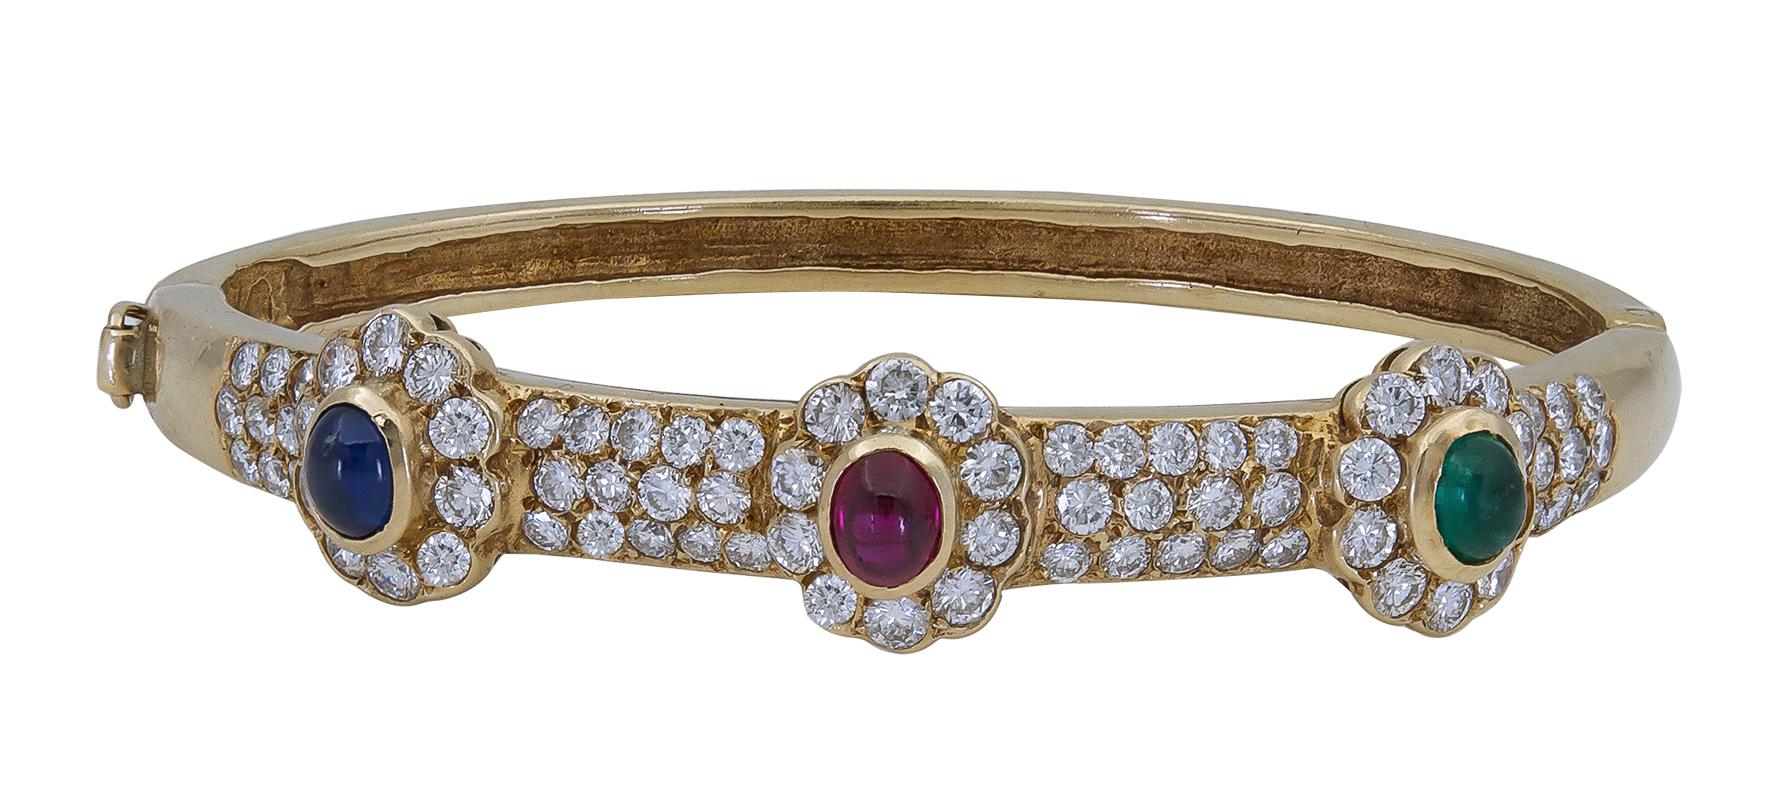 A beautiful bangle bracelet showcasing cabochon shaped ruby, sapphire, and emerald, surrounded by brilliant diamond petals. Each flower is spaced by round diamonds set in yellow gold. 
Fits up to a 6 inch wrist.
Up to 2 cm in thickness.